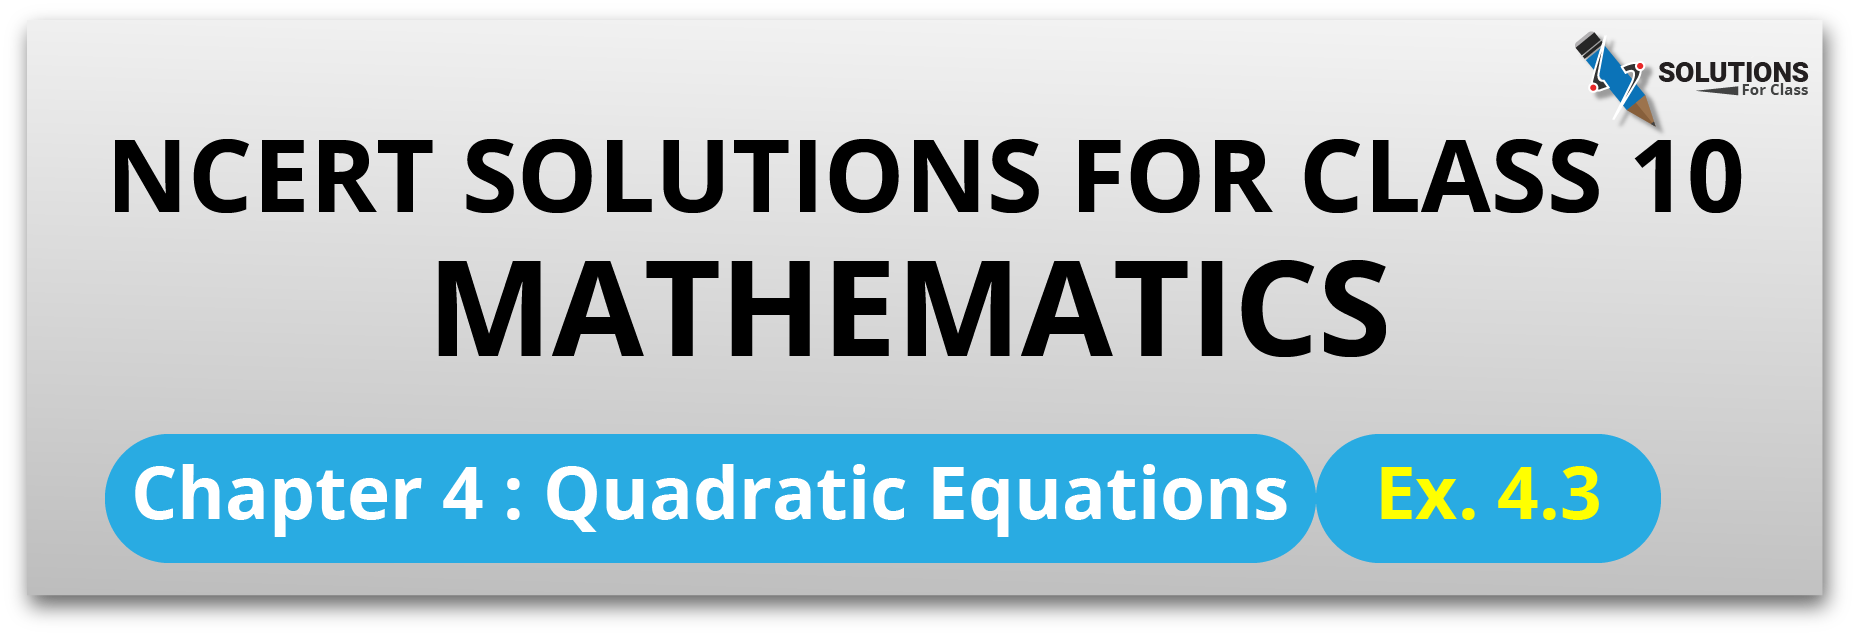 NCERT Solution For Class 10, Maths, Quadratic Equations, Exercise 4.3